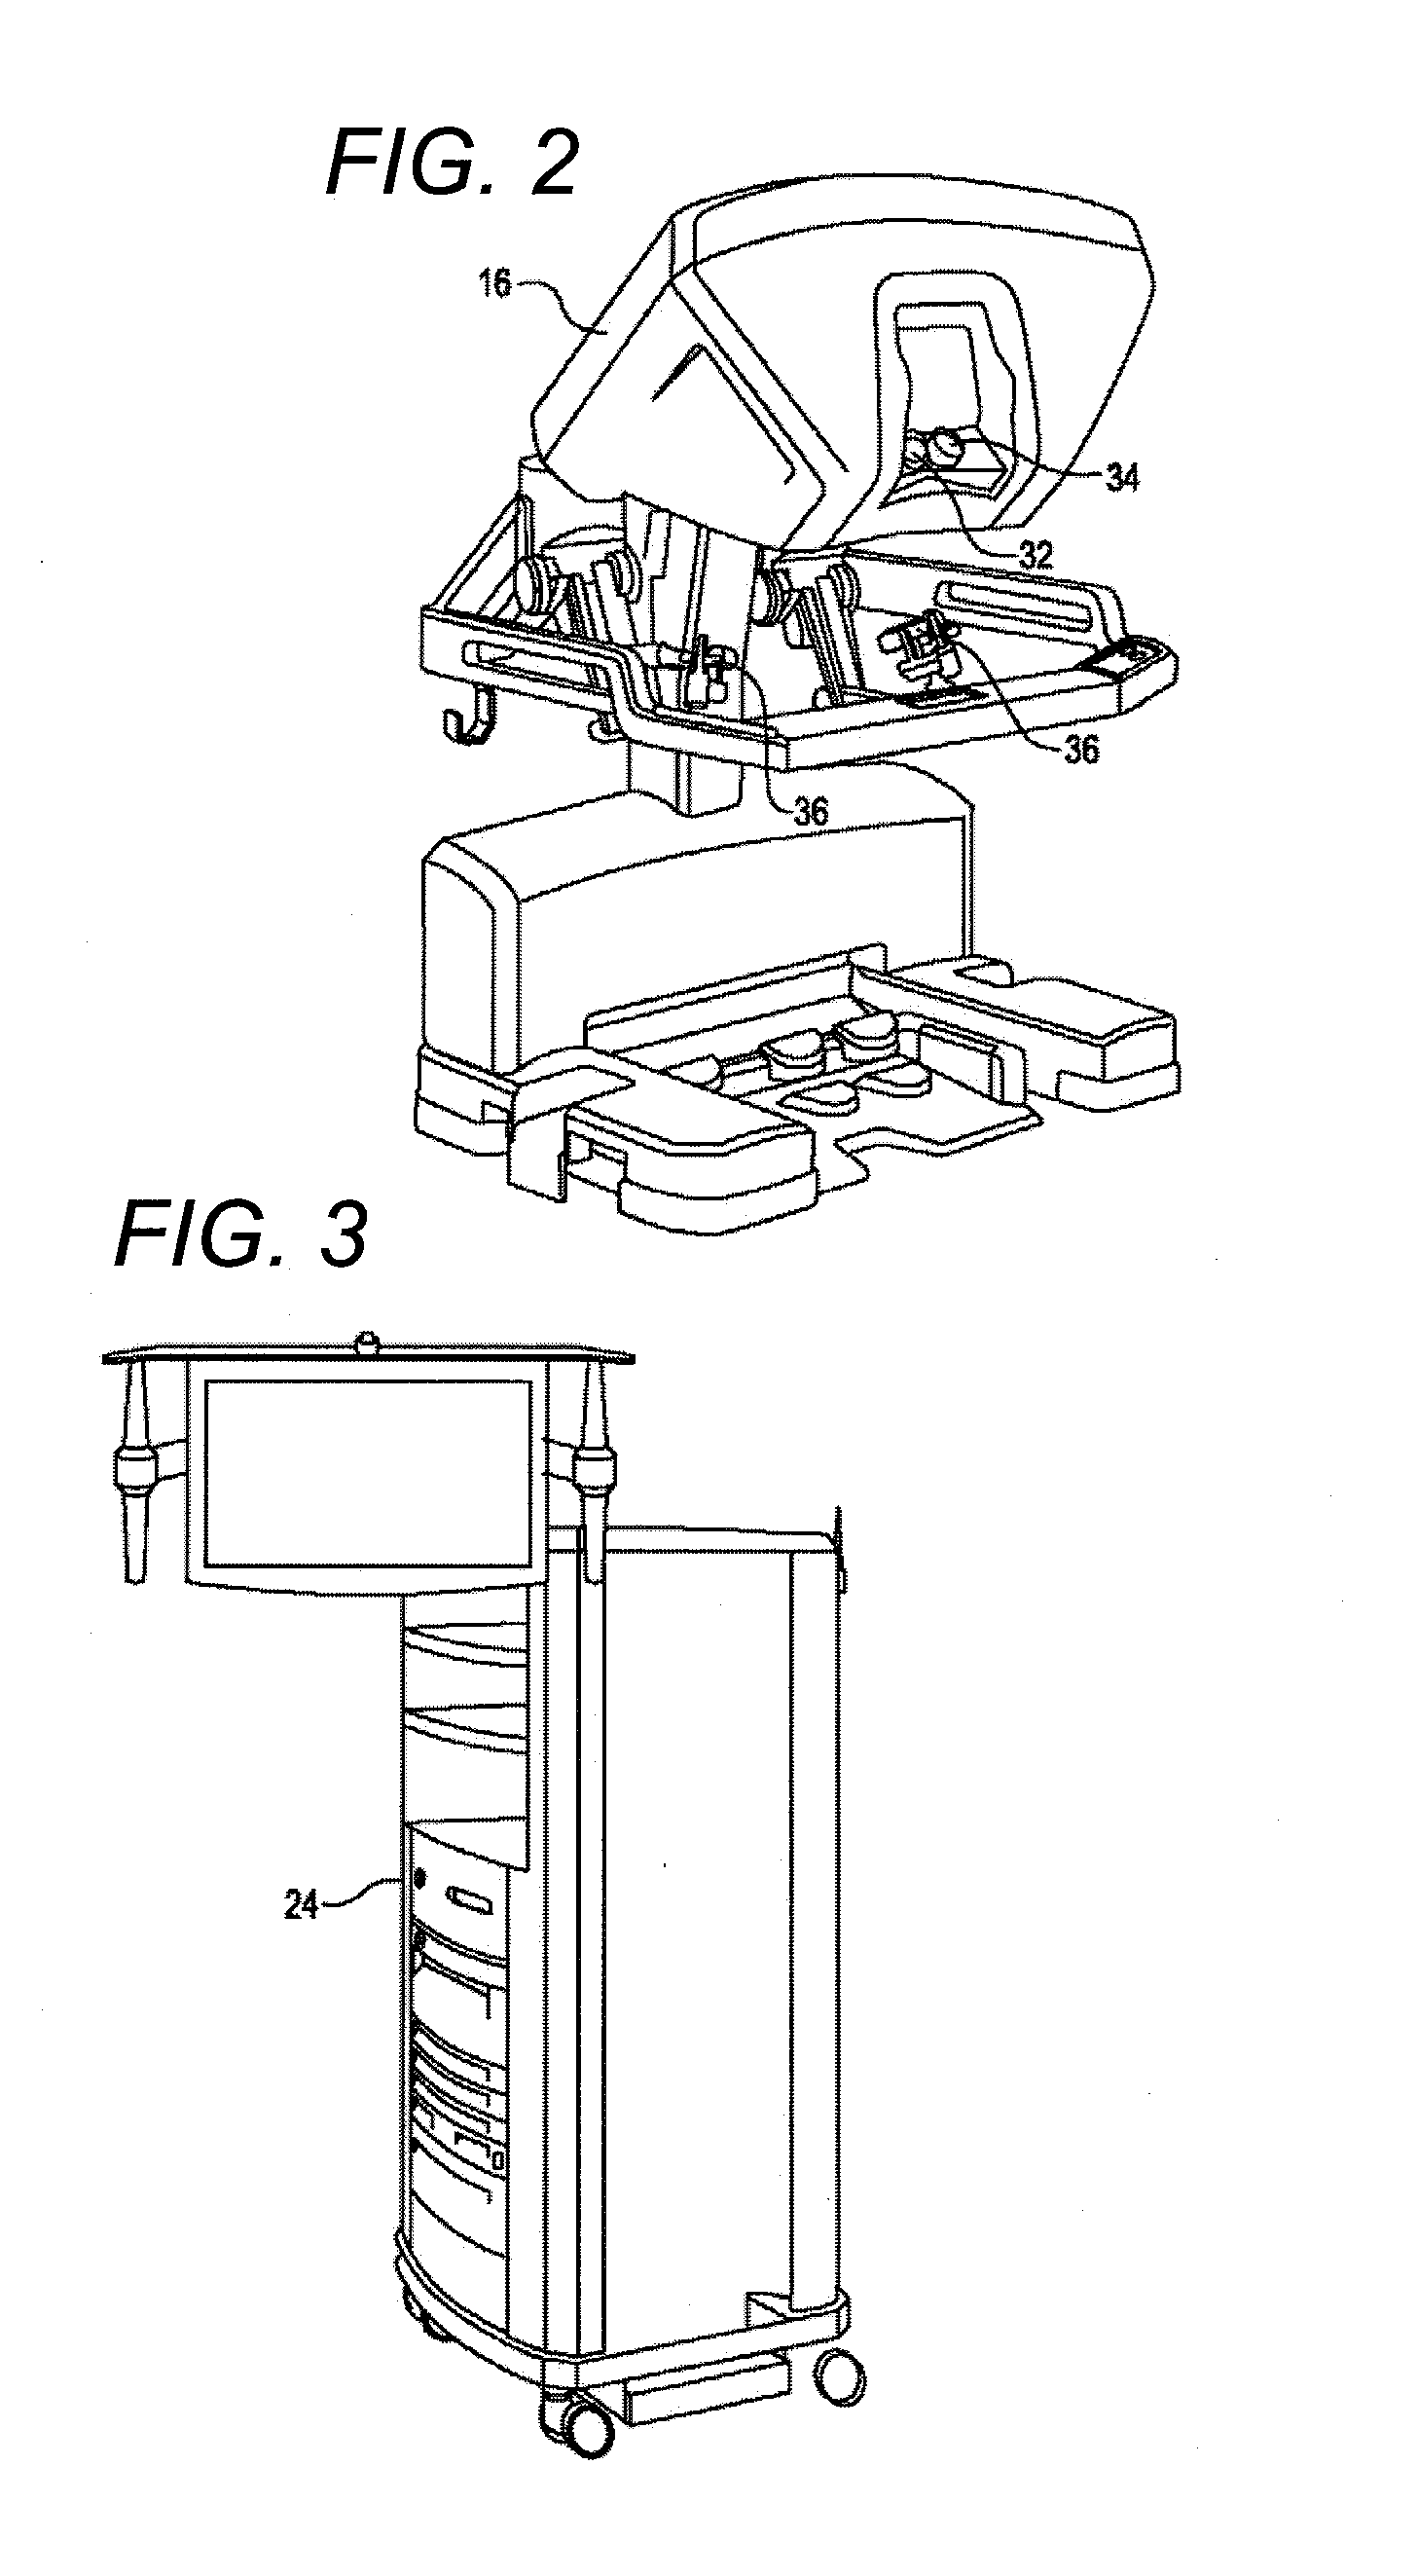 Instrument carriage assembly for surgical system